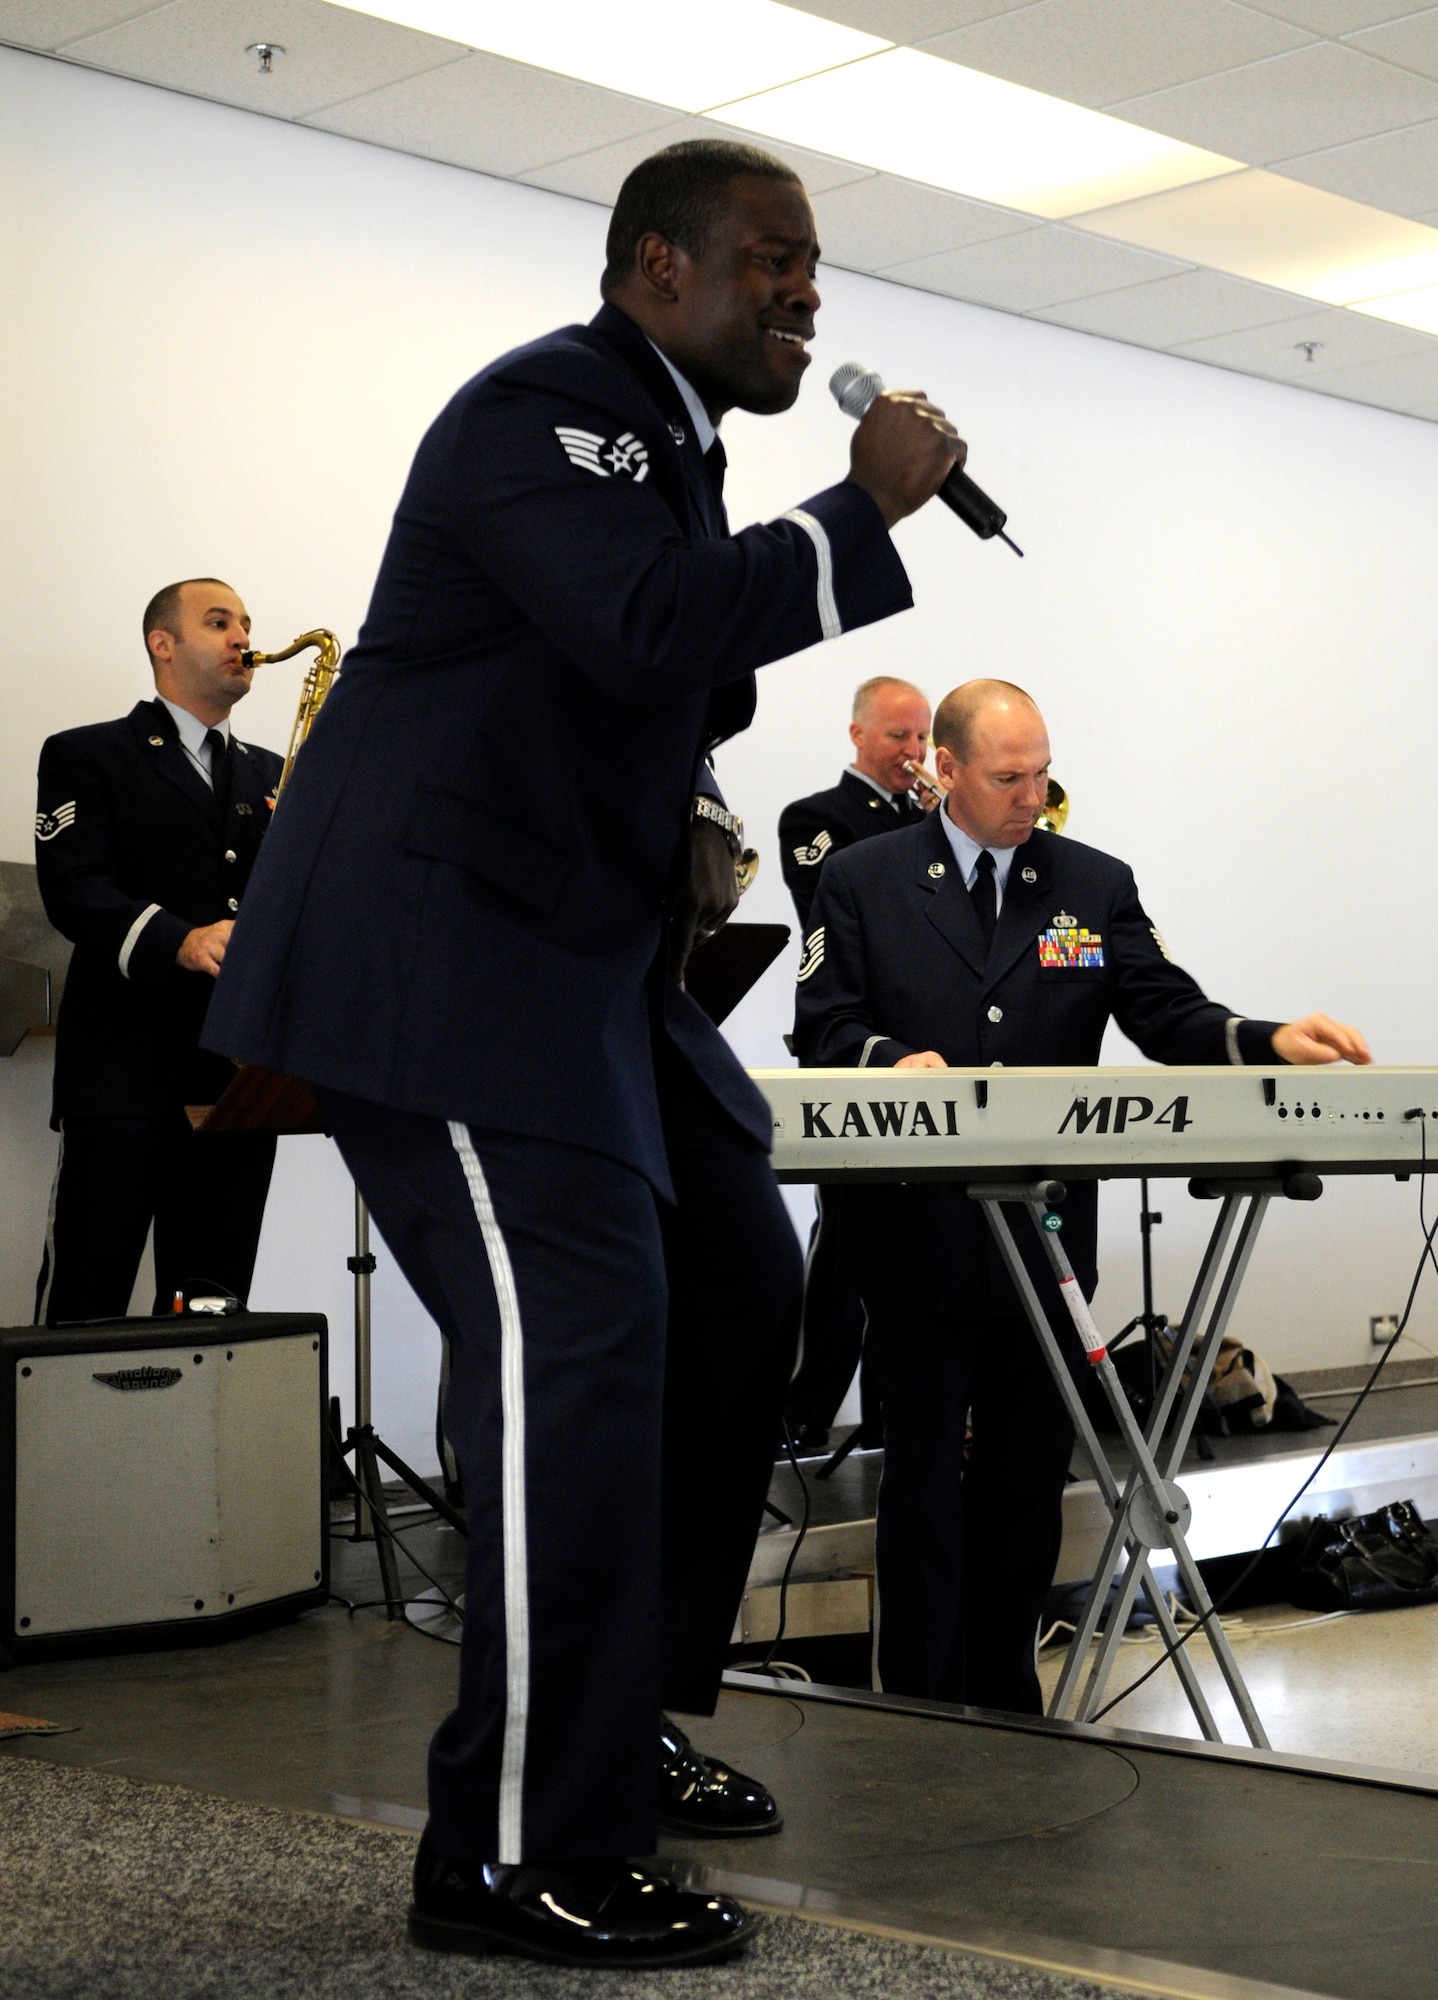 Staff Sgt. Andre Rascoe, a vocalist with the U.S. Air Forces in Europe Band, performs for a captive audience at the RAF Mildenhall 75th anniversary celebration, May 15, 2009.  The band operates out of  Sembach Air Base Germany, and performs all over Europe.  (U.S. Air Force photo by Senior Airman Christopher L. Ingersoll)